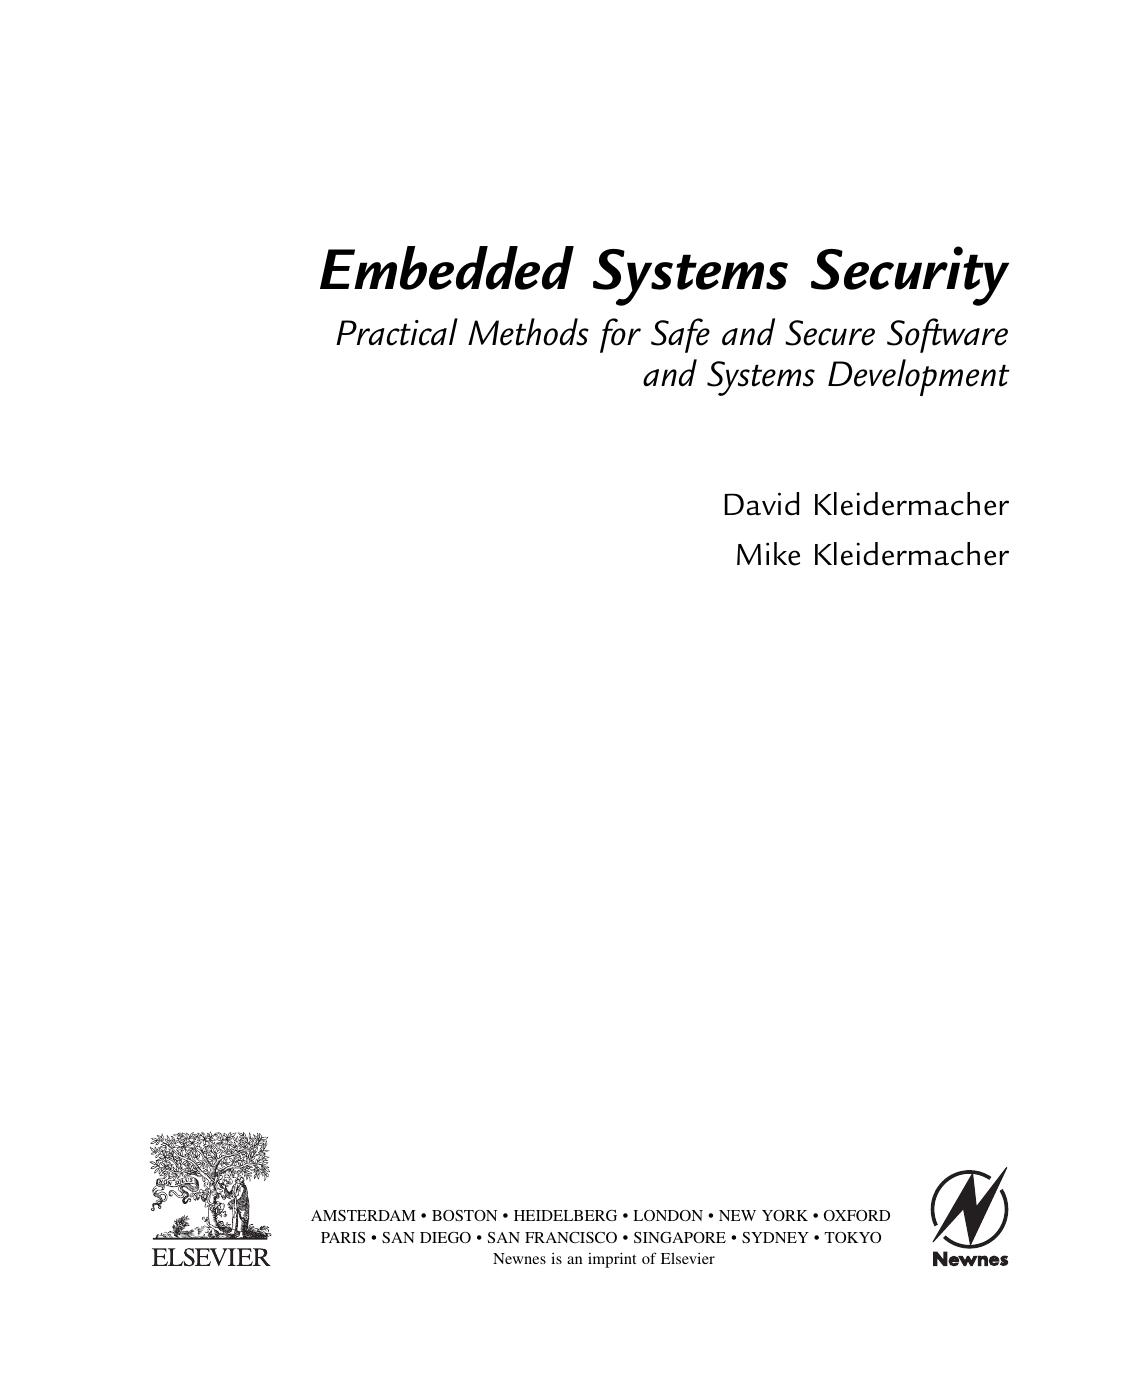 Embedded Systems Security: Practical Methods for Safe and Secure Software and Systems Development by David Kleidermacher Mike Kleidermacher